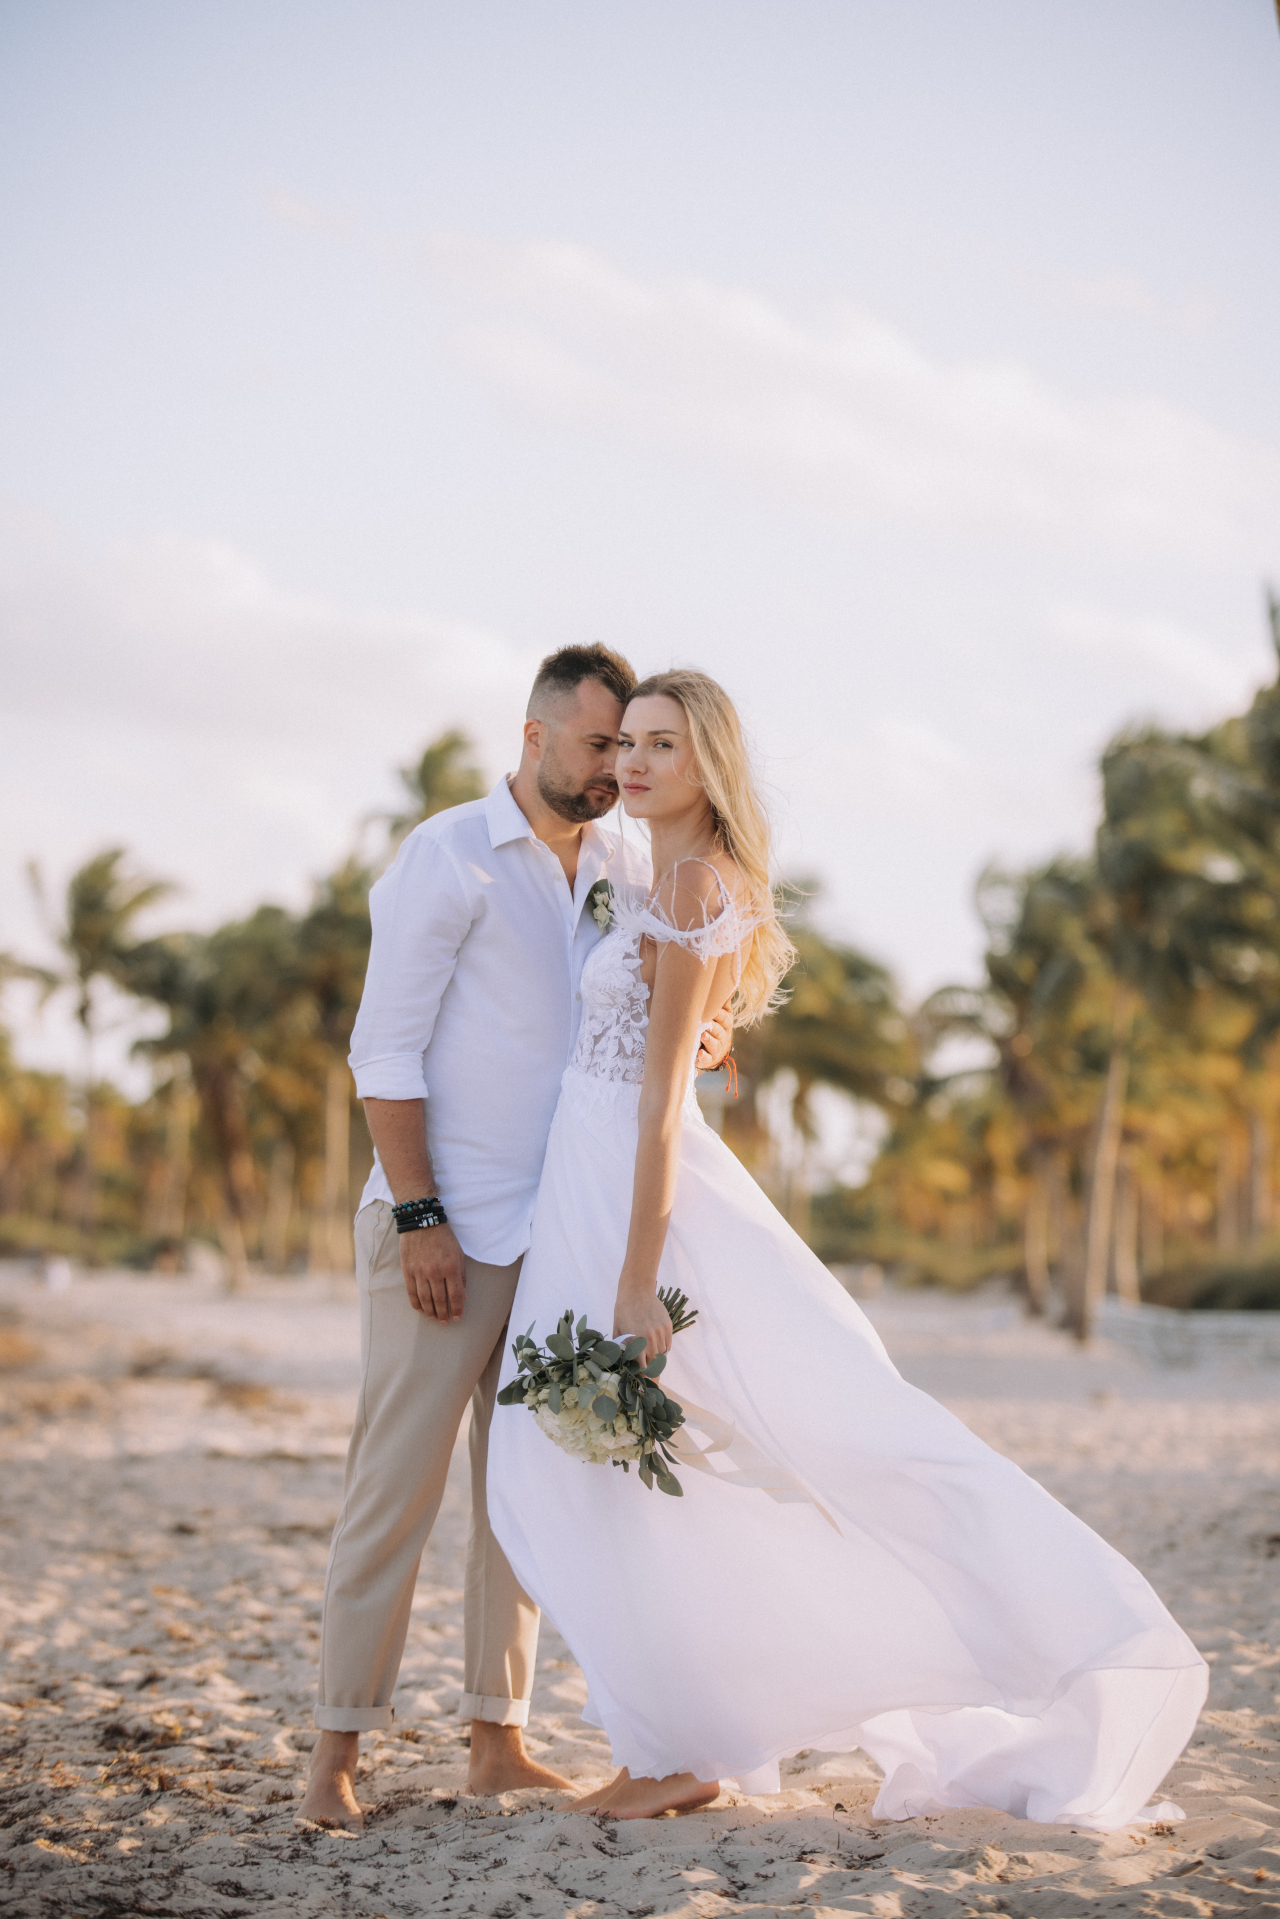 Wedding Photography and Videography Miami, FL left image